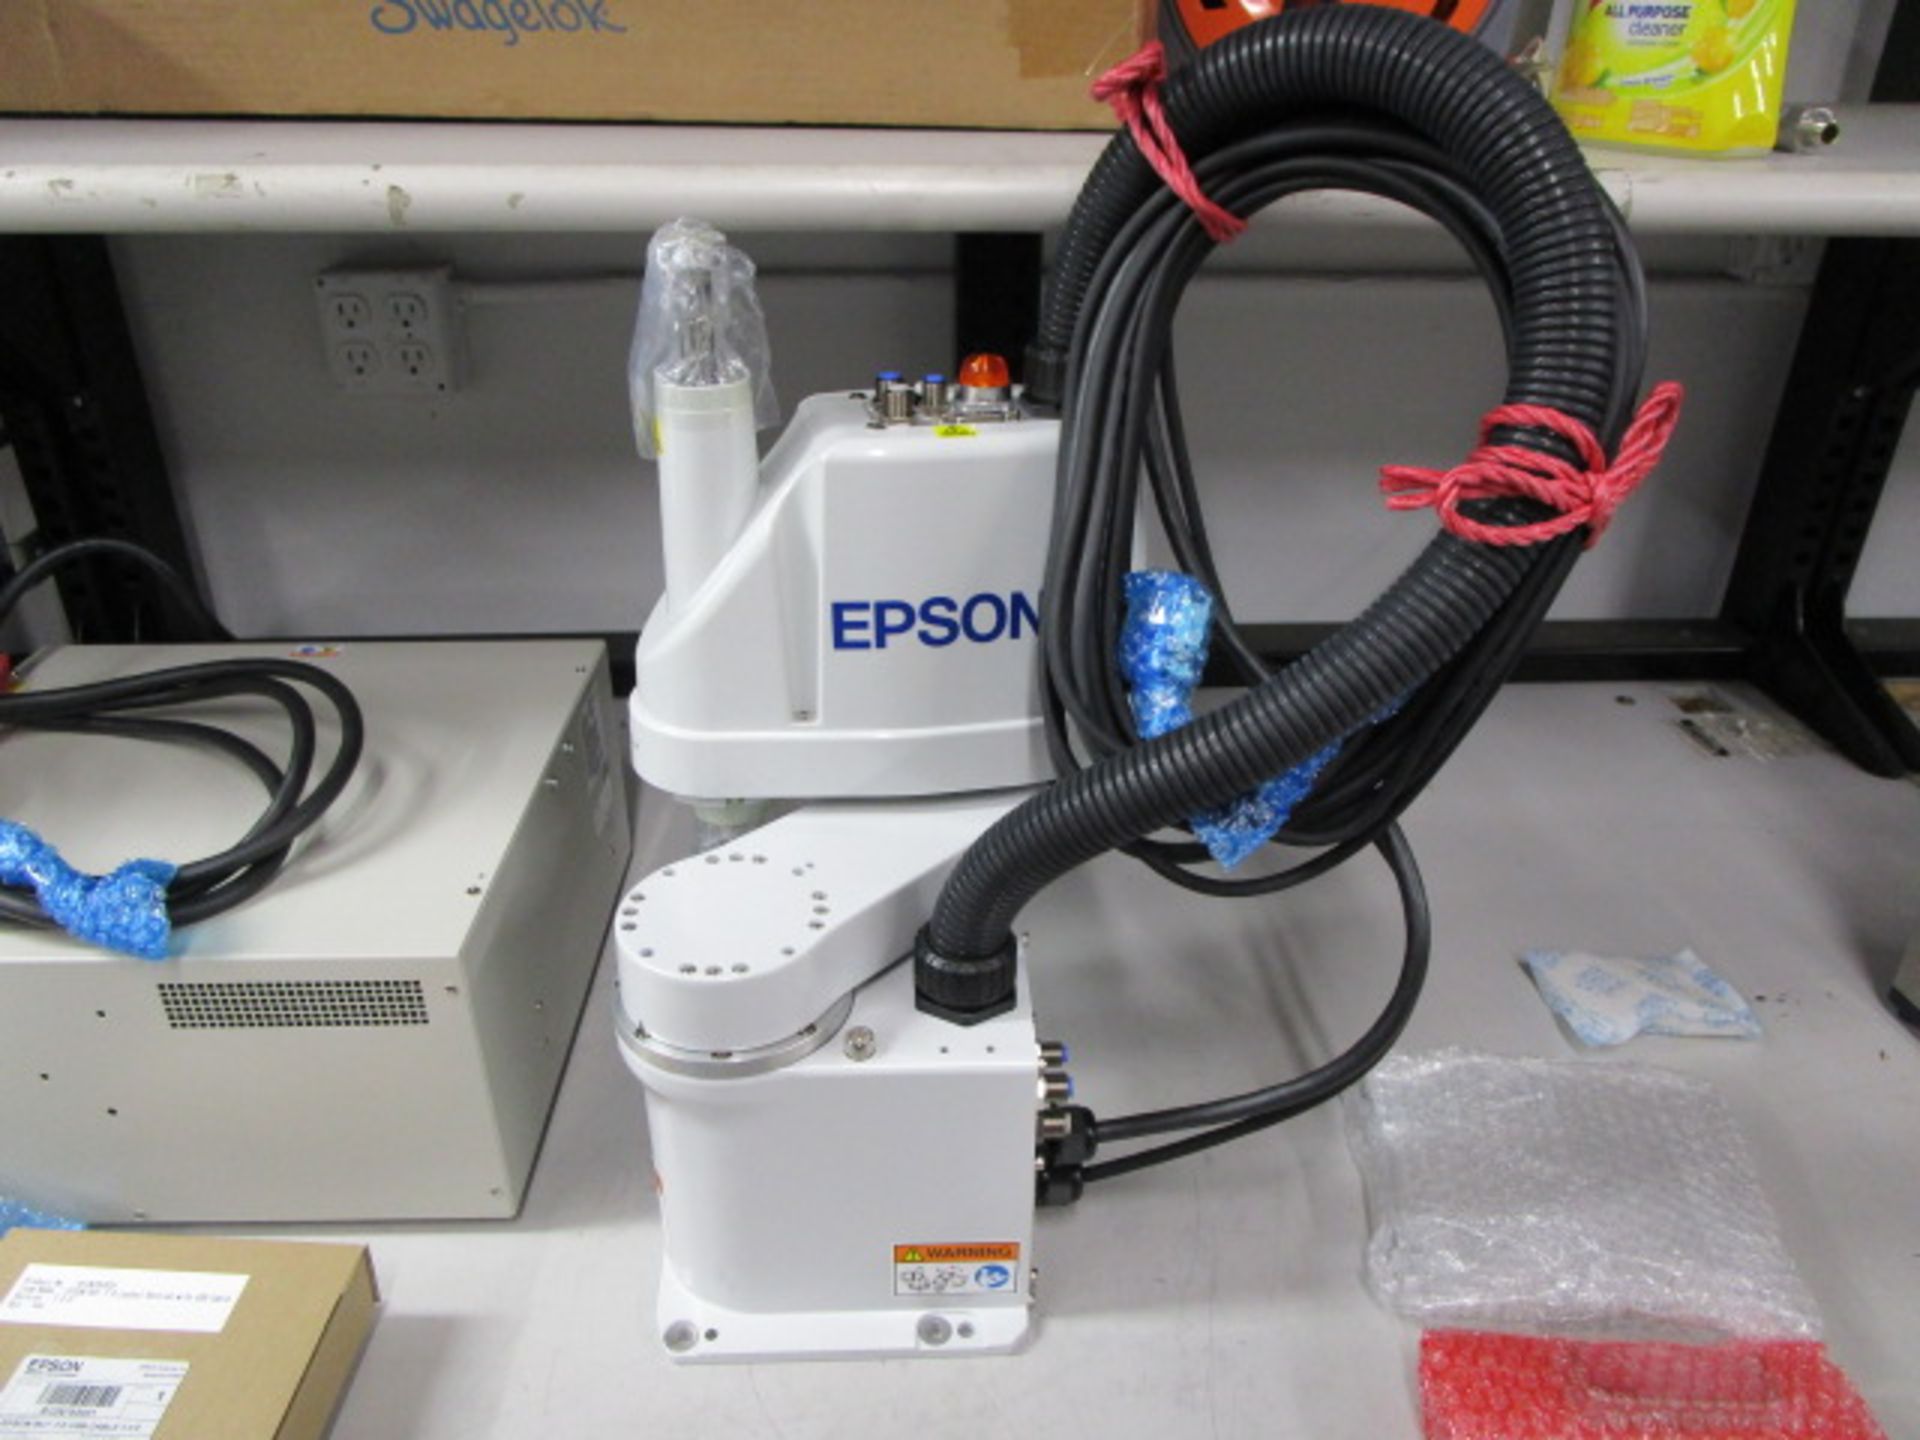 EPSON "BRAND NEW IN THE BOX" INDUSTRIAL ROBOT MODEL NO. R11N1019 WITH MANIPULATOR LS3-401S & - Image 2 of 13